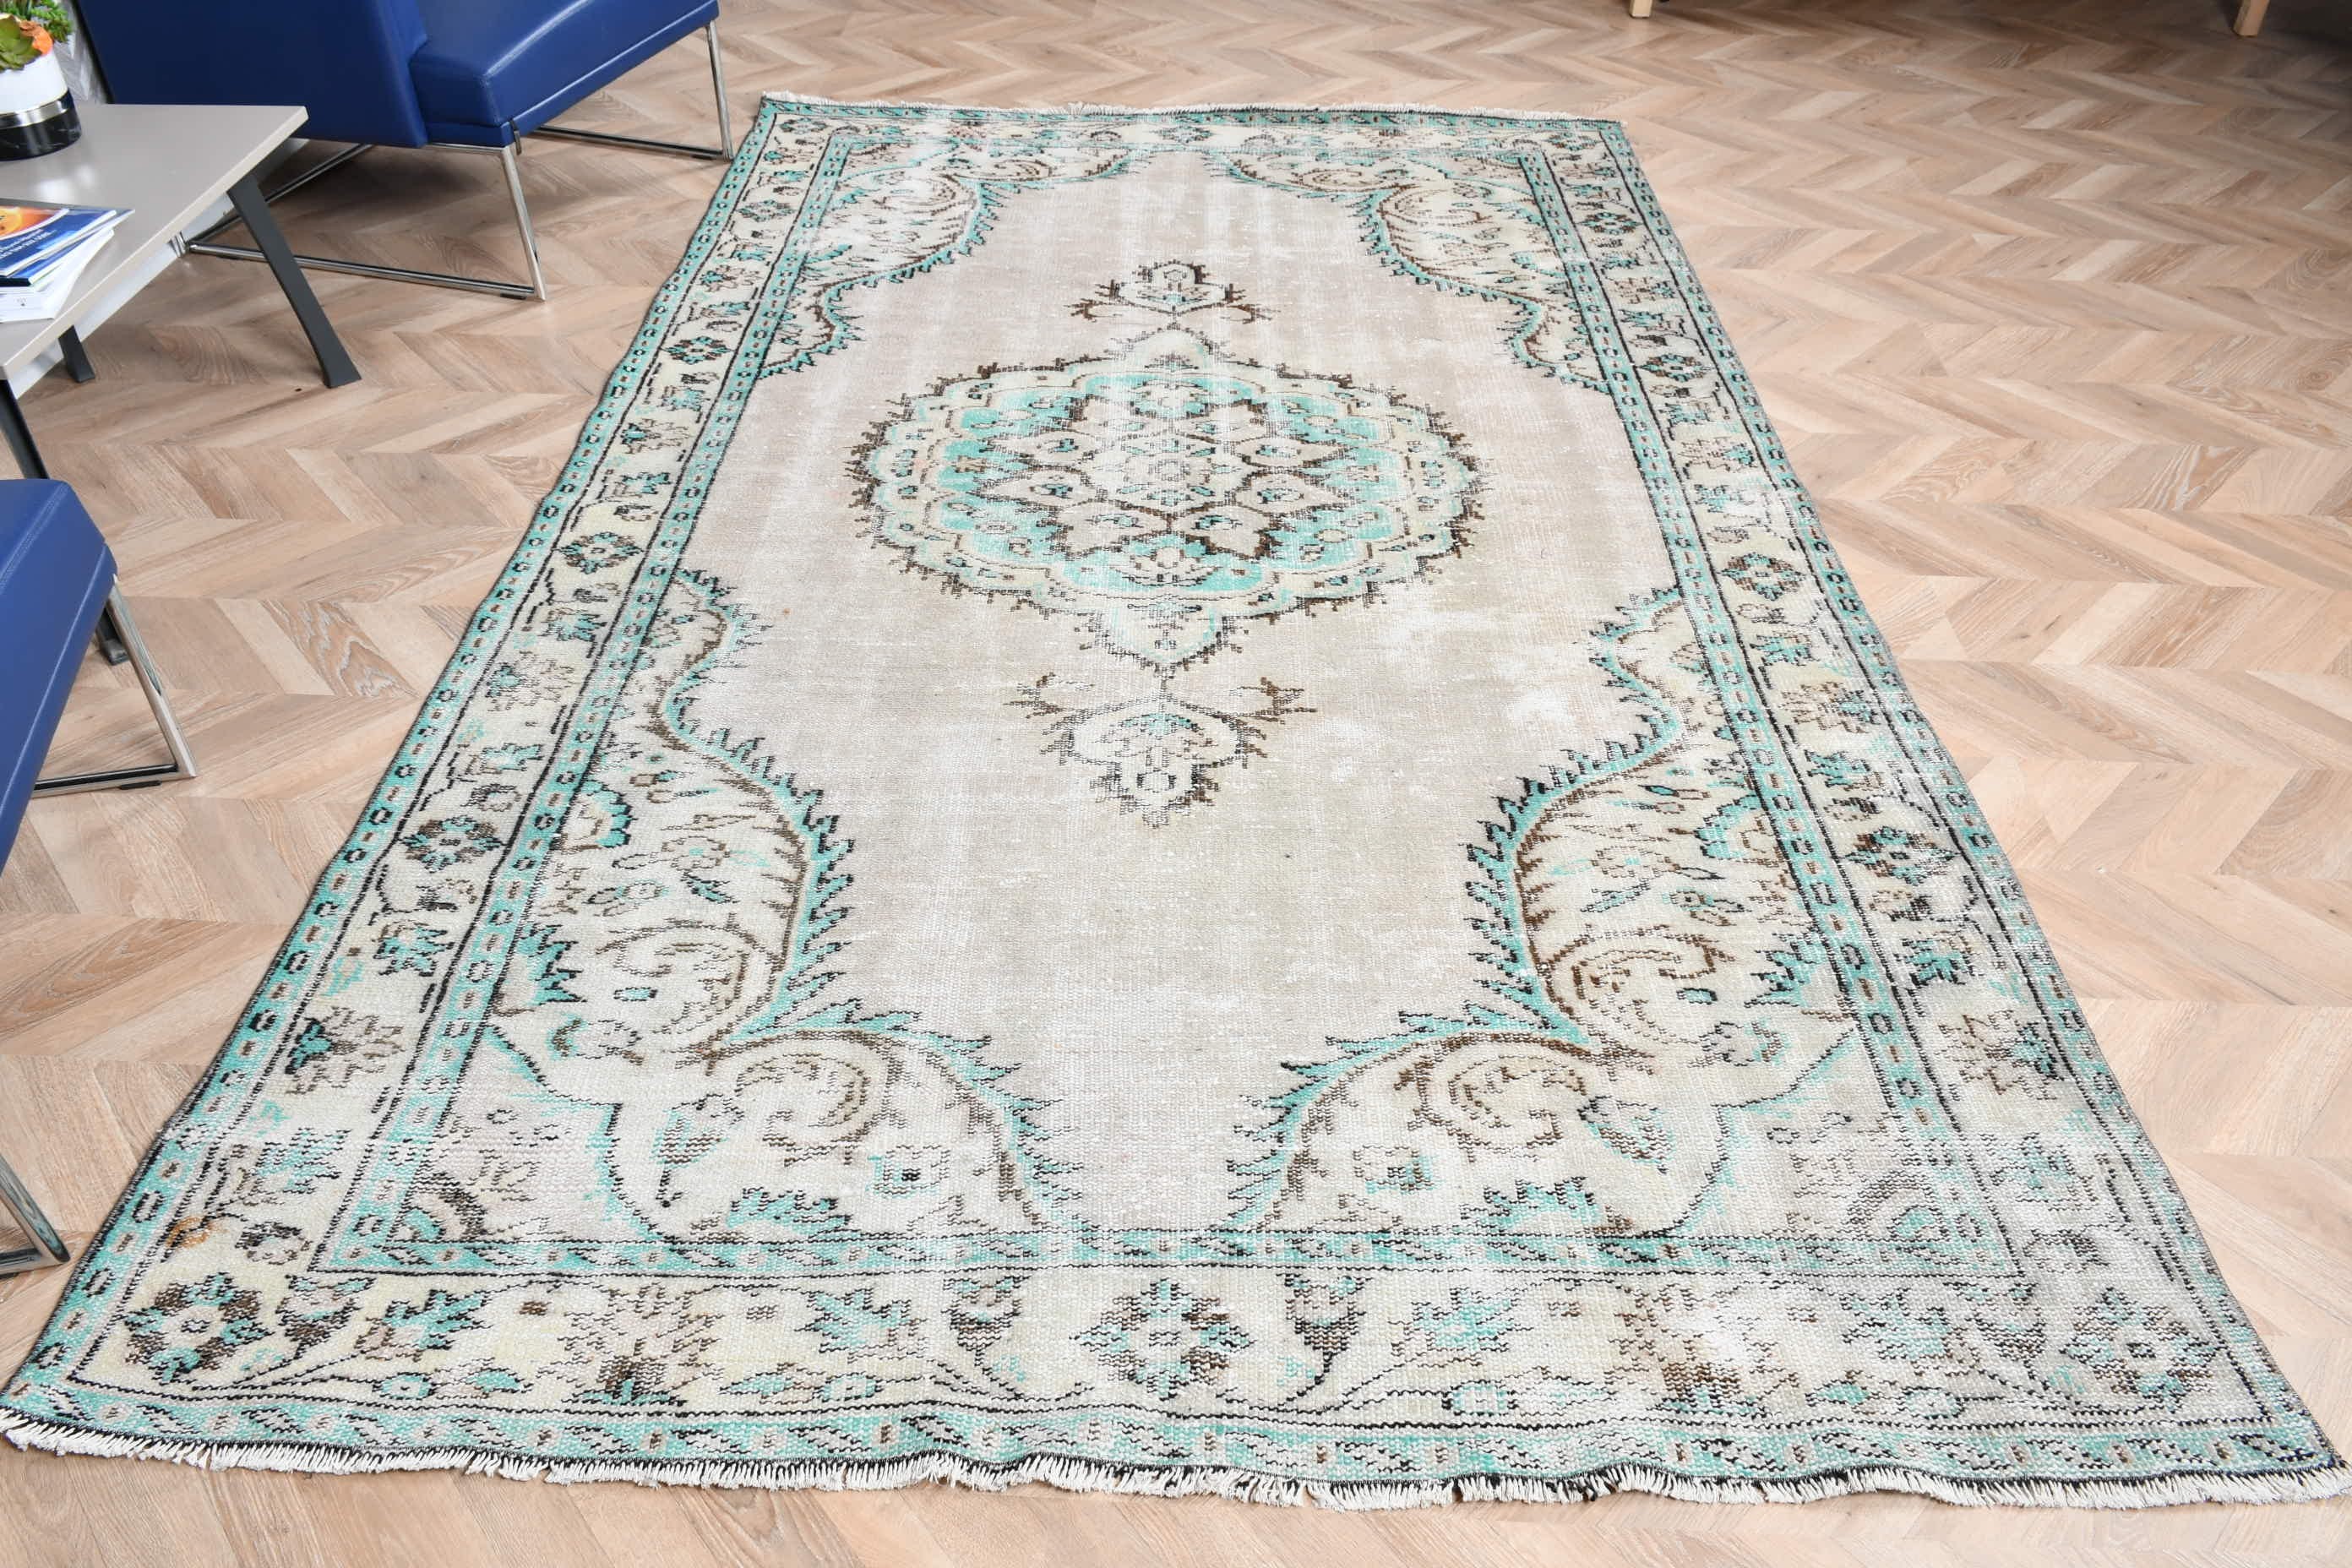 Oushak Rug, Turkish Rugs, 5.7x9.7 ft Large Rugs, Office Rug, Cool Rugs, Vintage Rug, Green Home Decor Rugs, Salon Rugs, Living Room Rugs